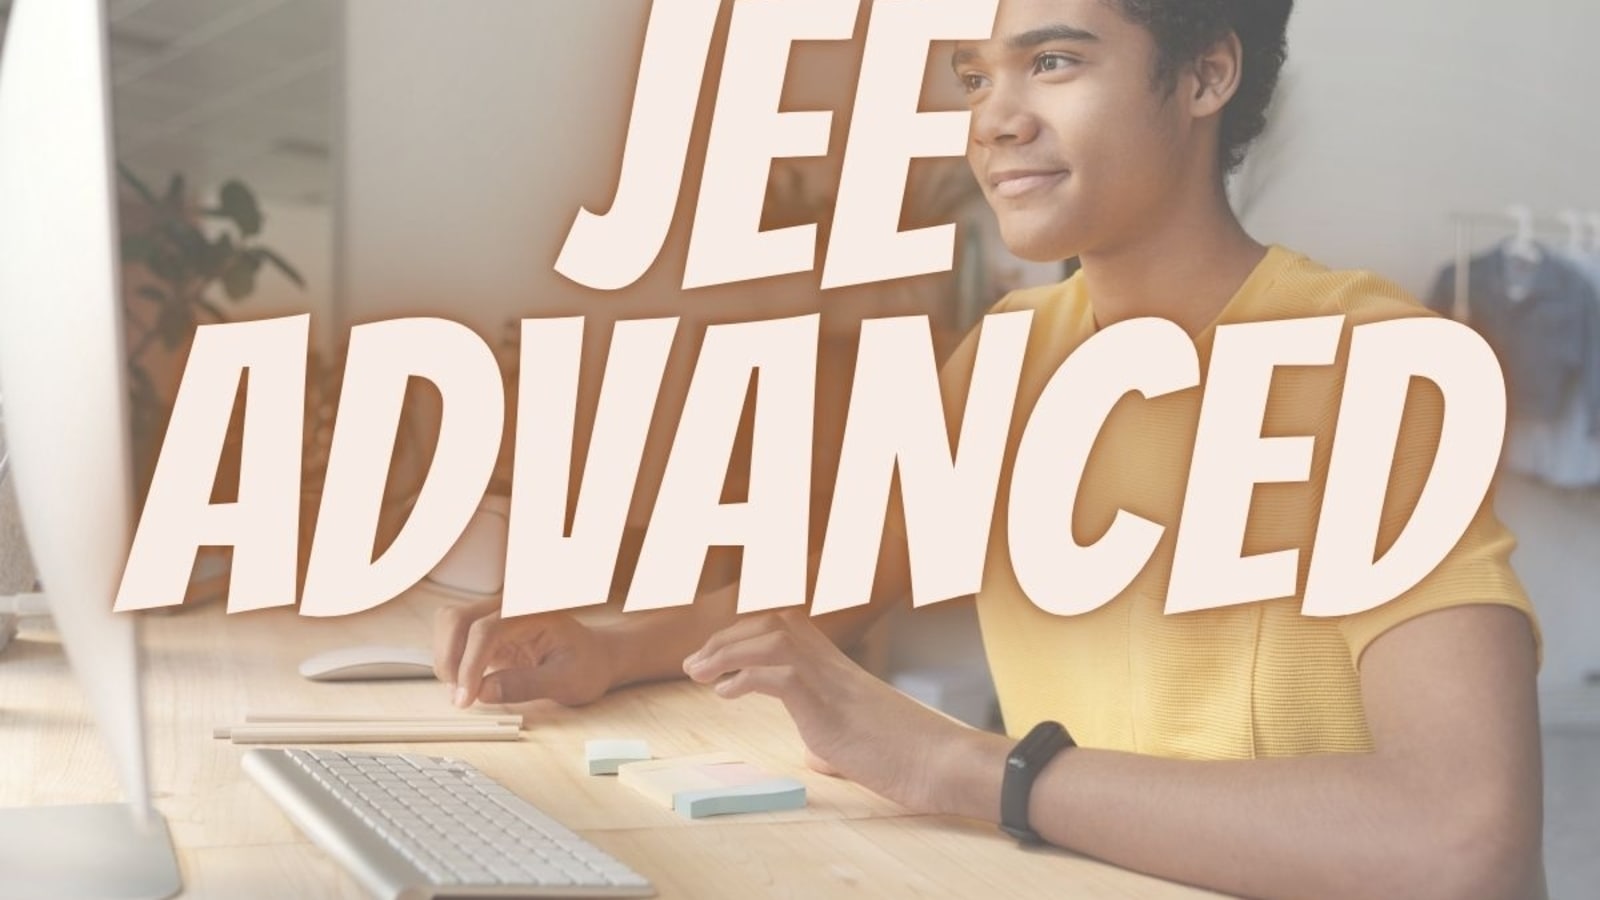 JEE Advanced 2022: IIT JEE exam rescheduled, to be conducted on August 28